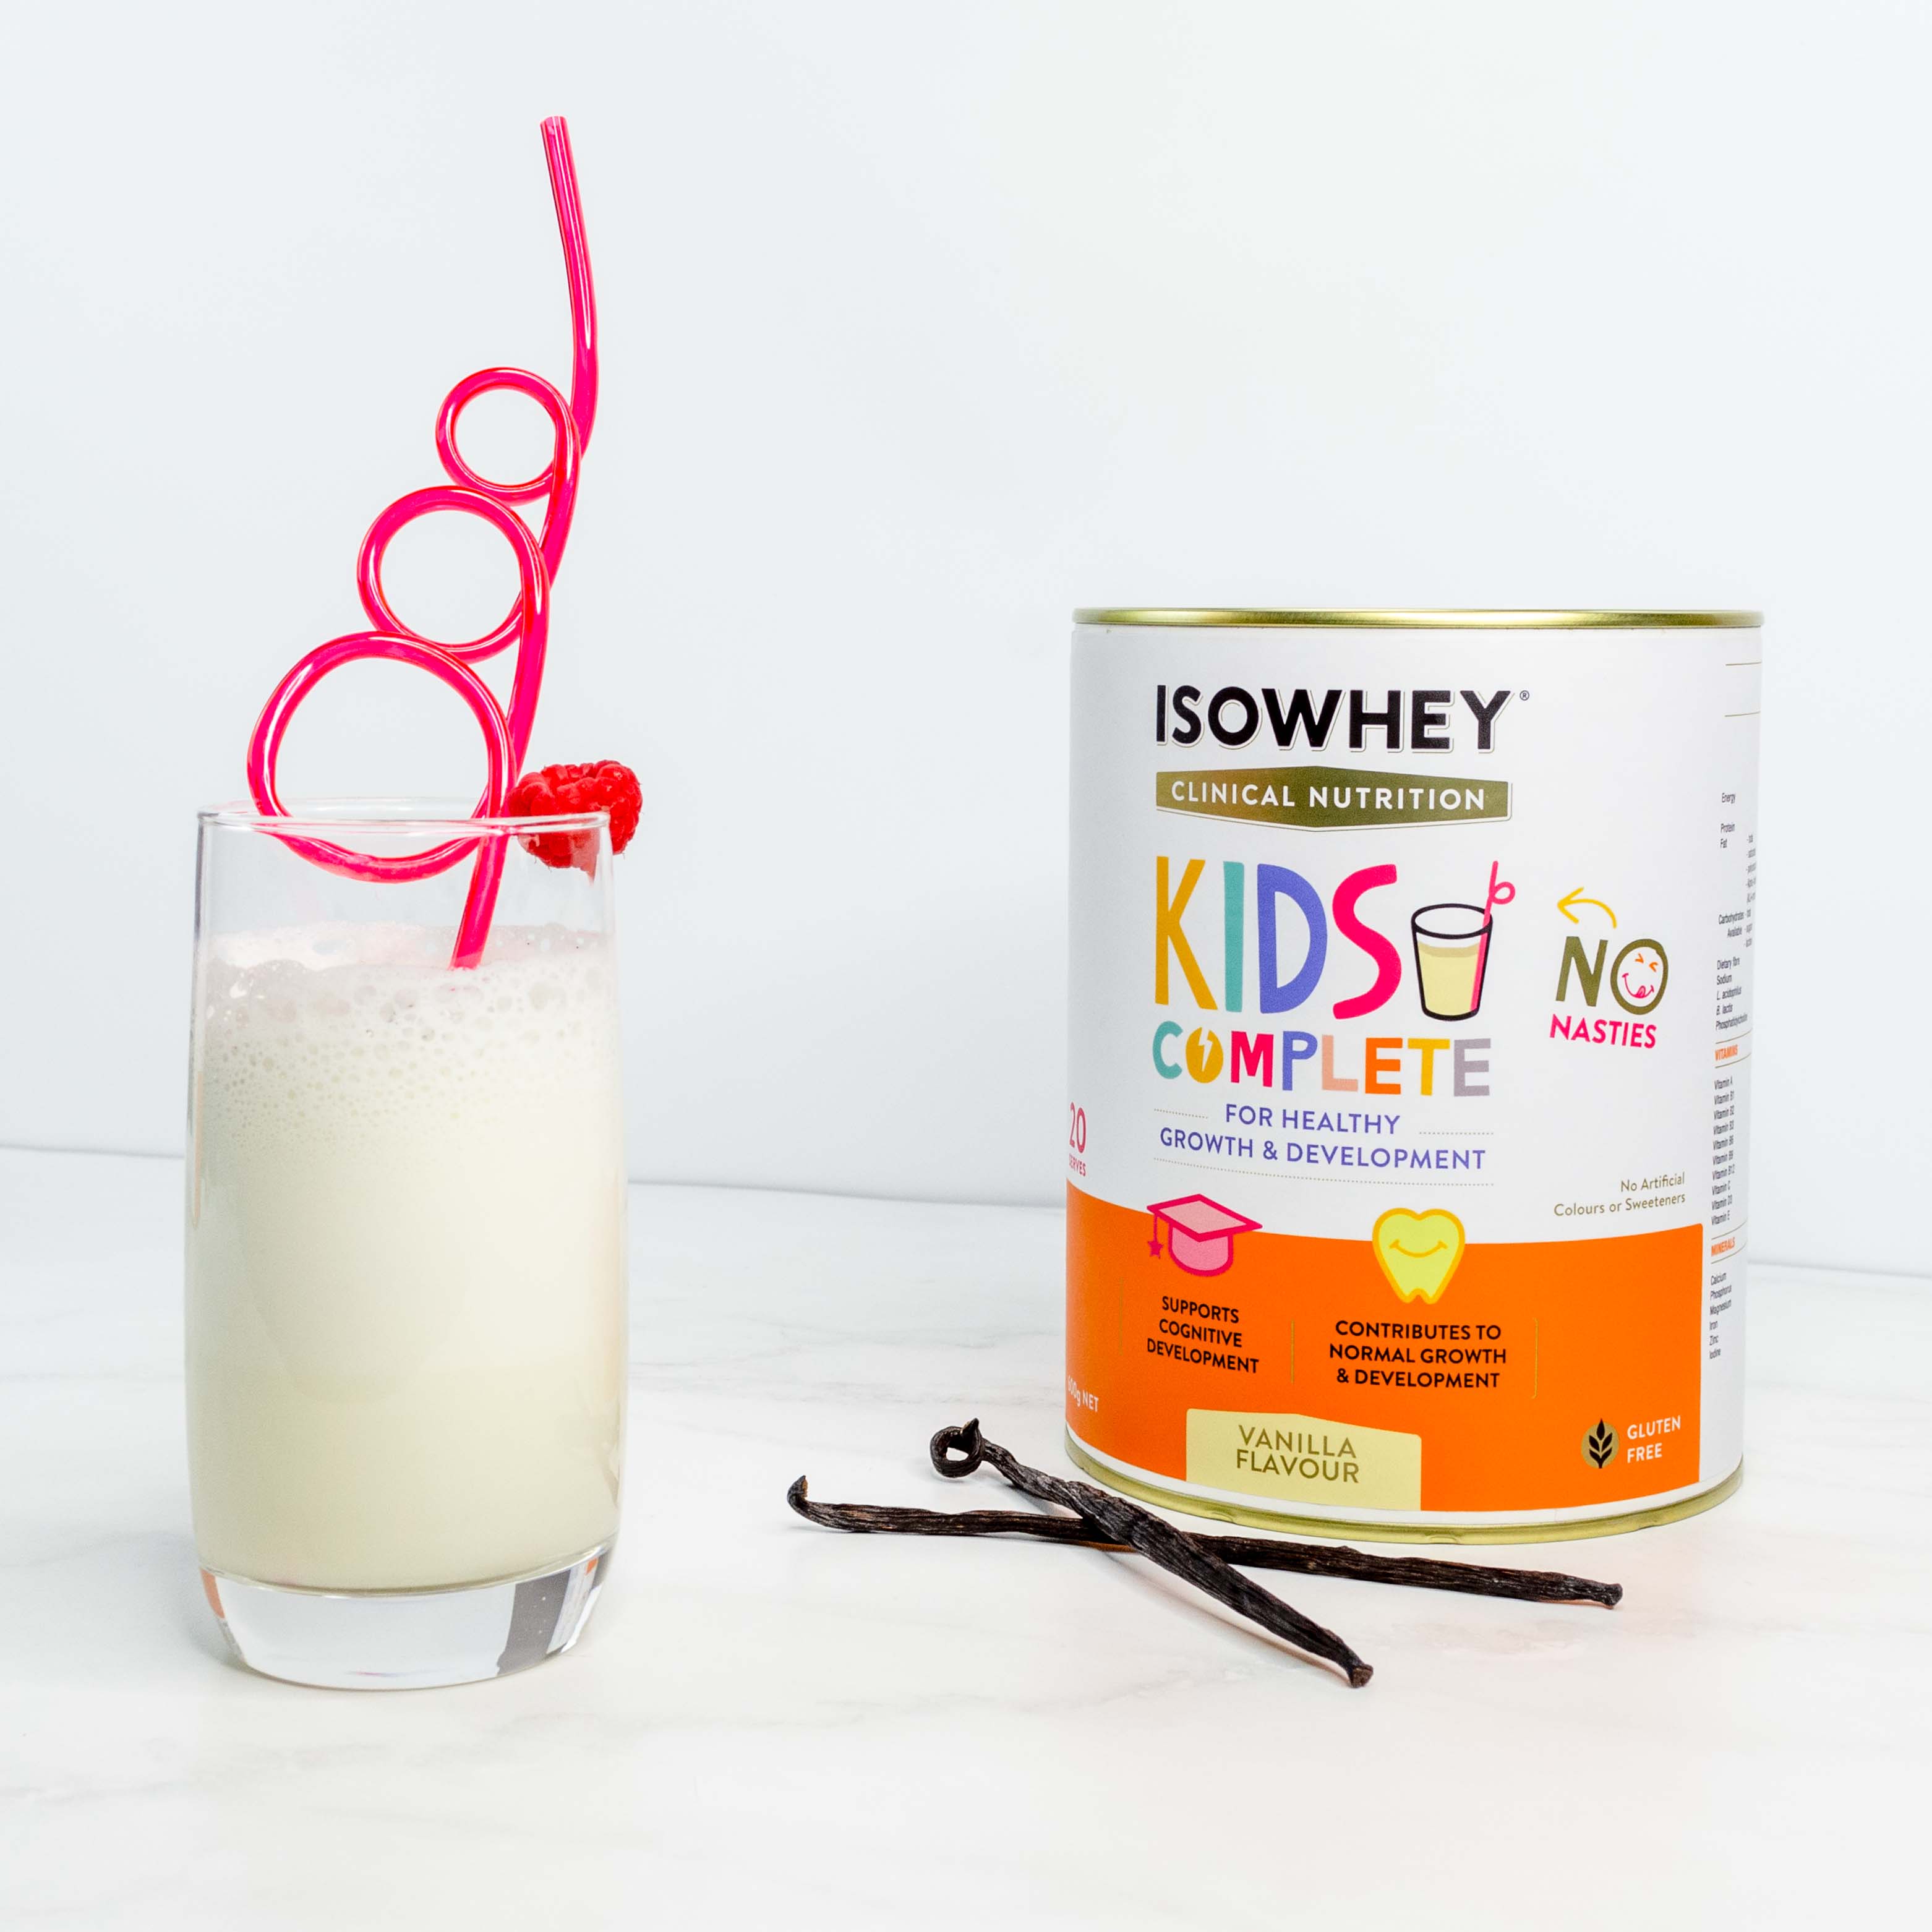 IsoWhey Clinical Nutrition Kids Complete Vanilla 600g with a glass of Isowhey shake & dried vanilla pod